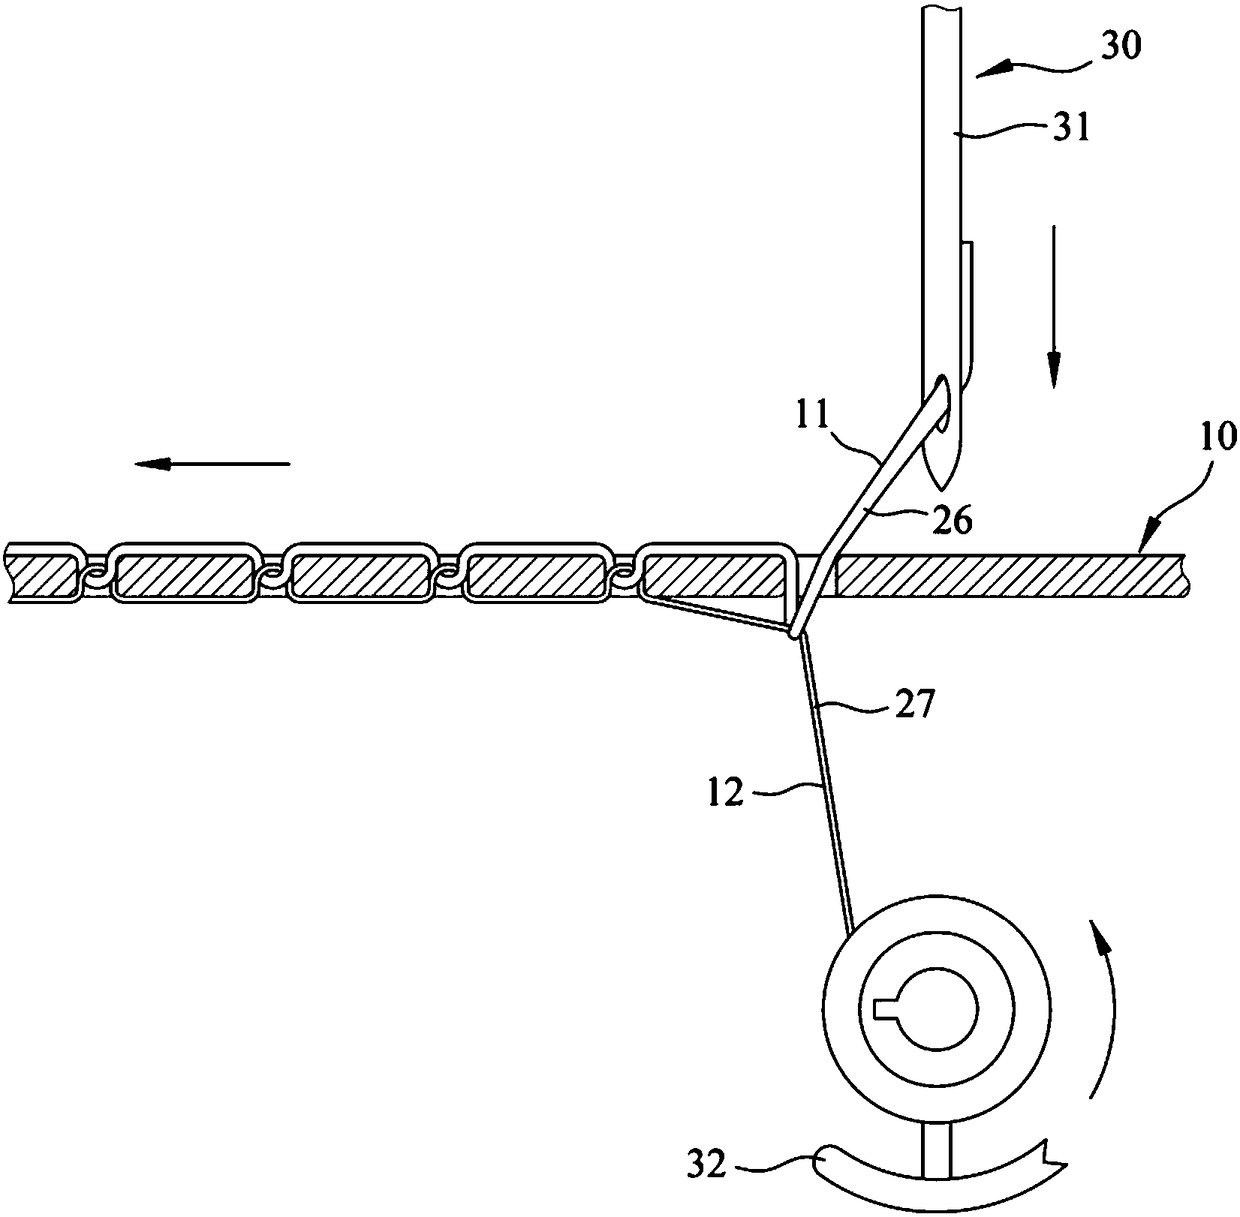 Horn vibrating reed sewn into wire and method for sewing wire into horn vibrating reed